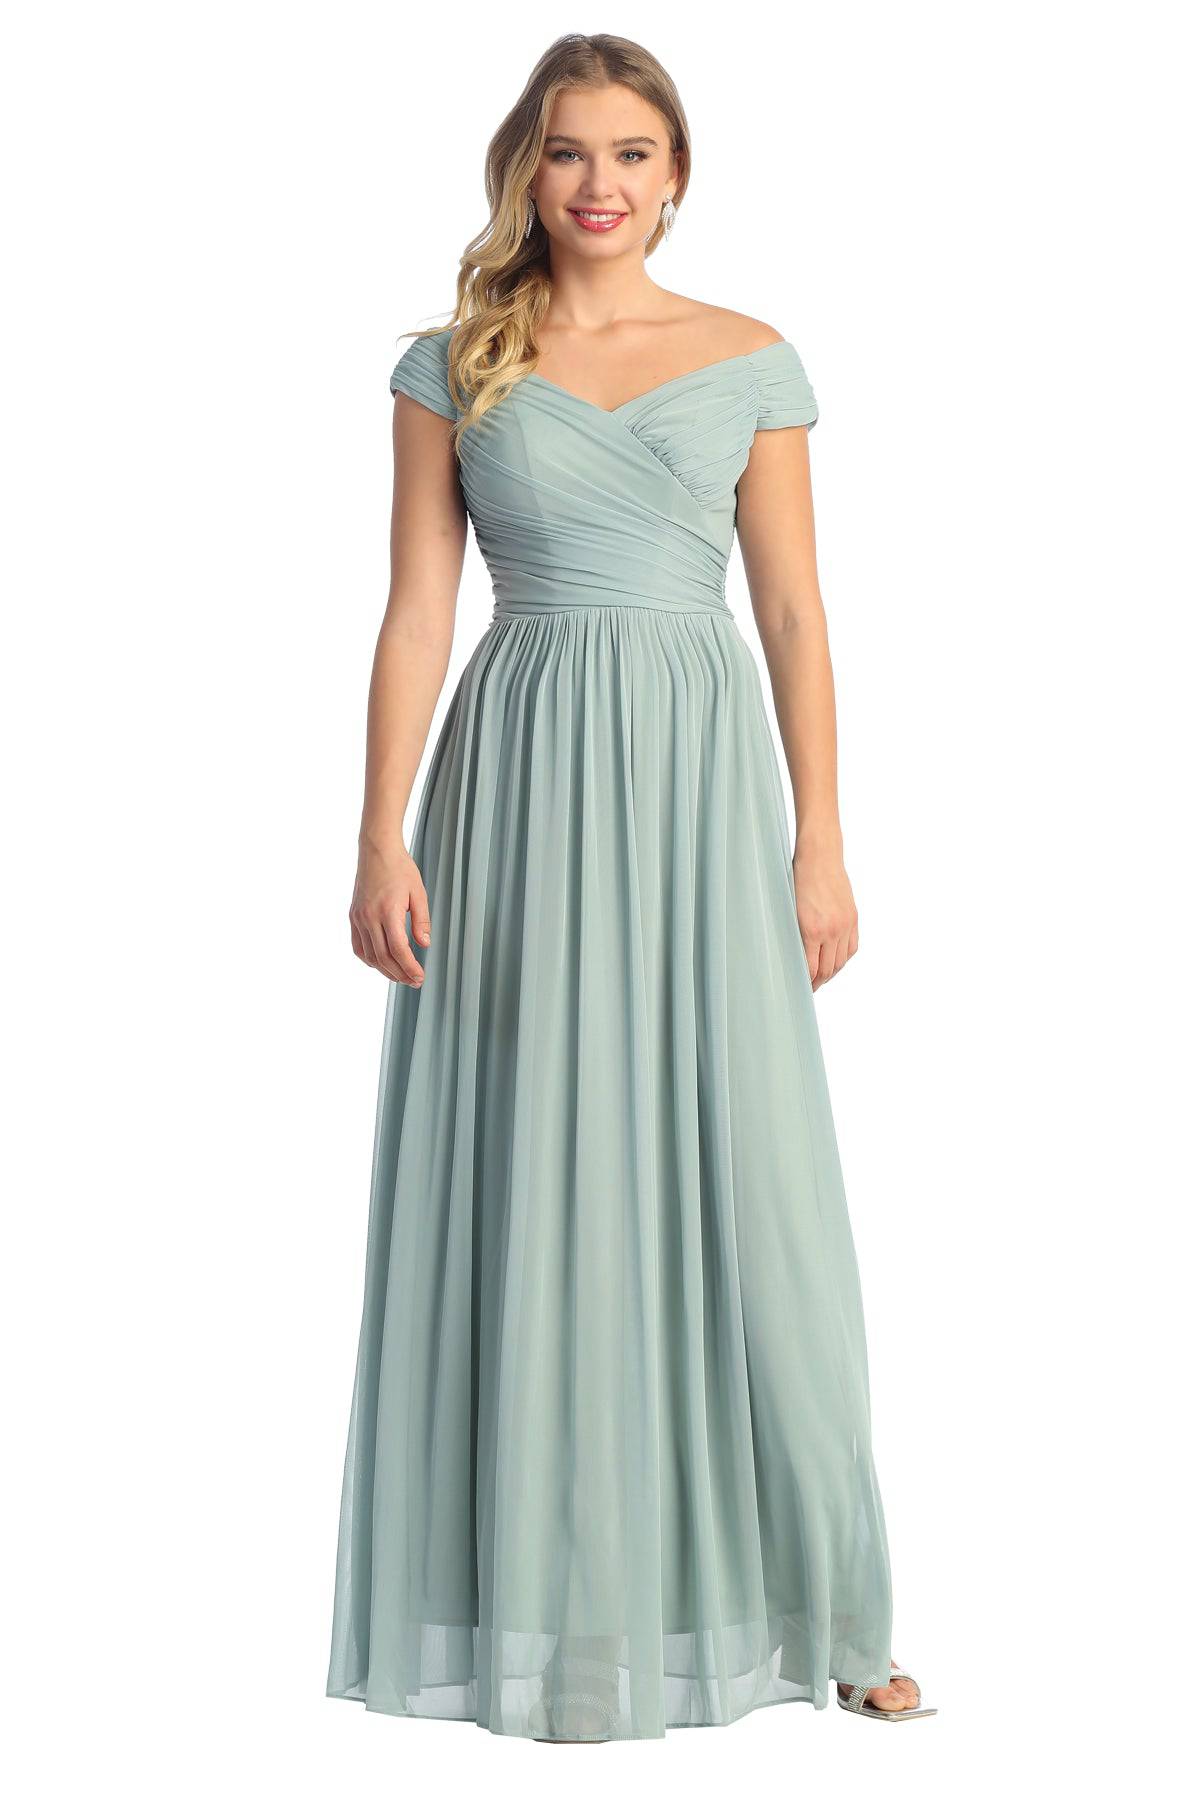 Cindy Collection 1600 Sage A Line Dress - NORMA REED